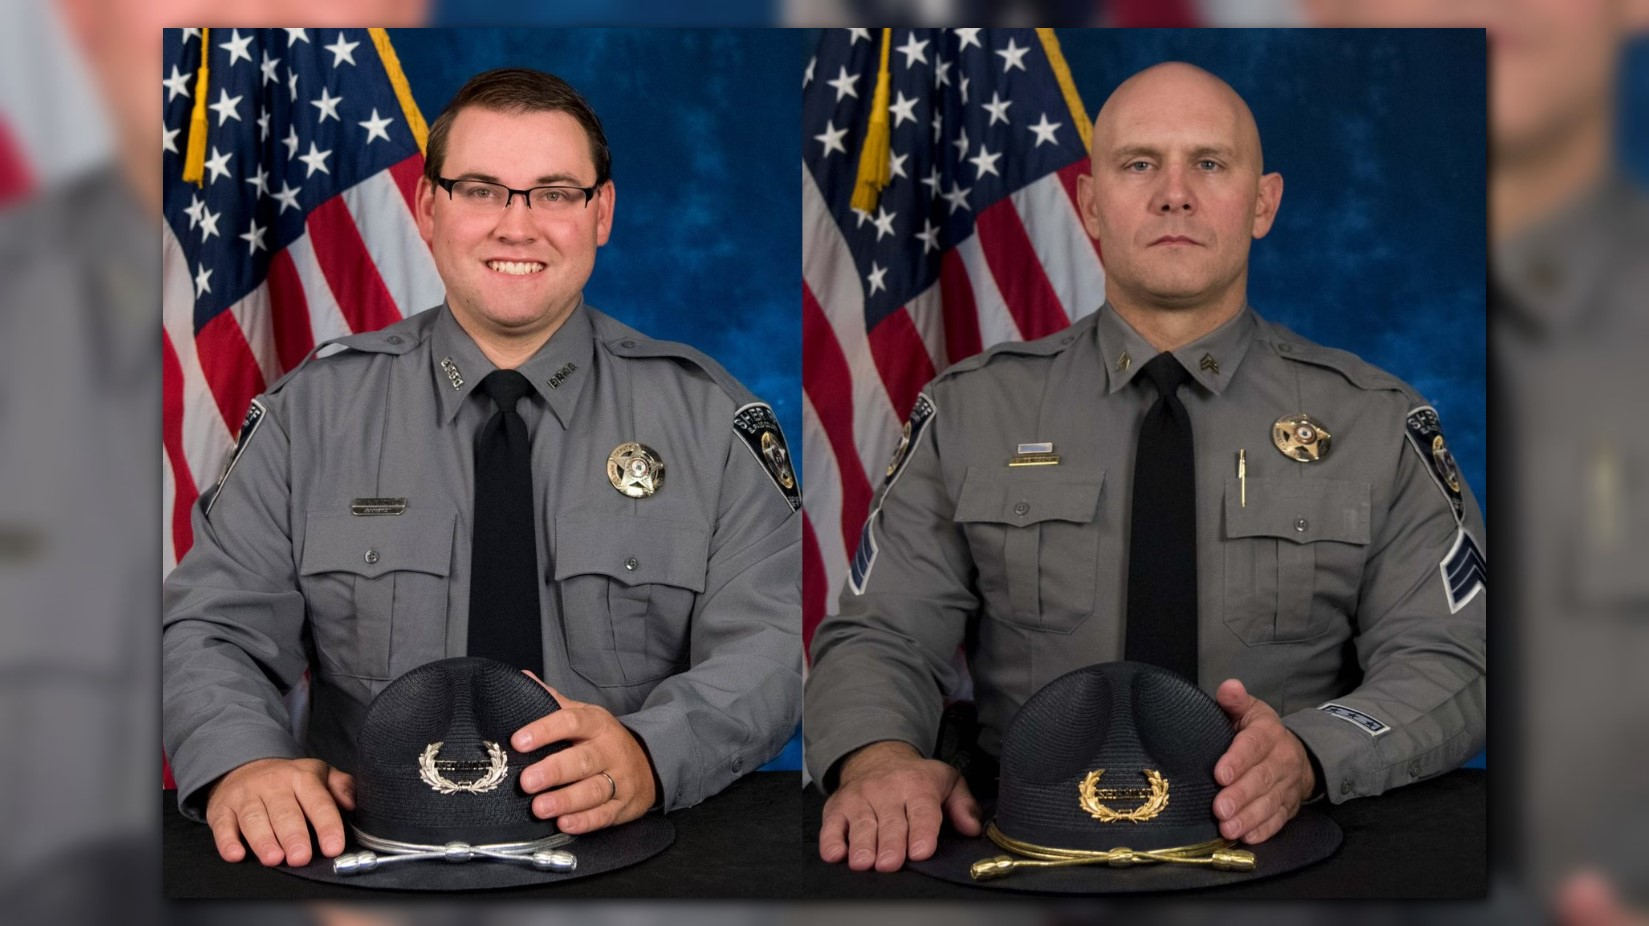 El Paso County Sheriff's Sergeant wounded in shooting out of hospital,  Deputy is stable 